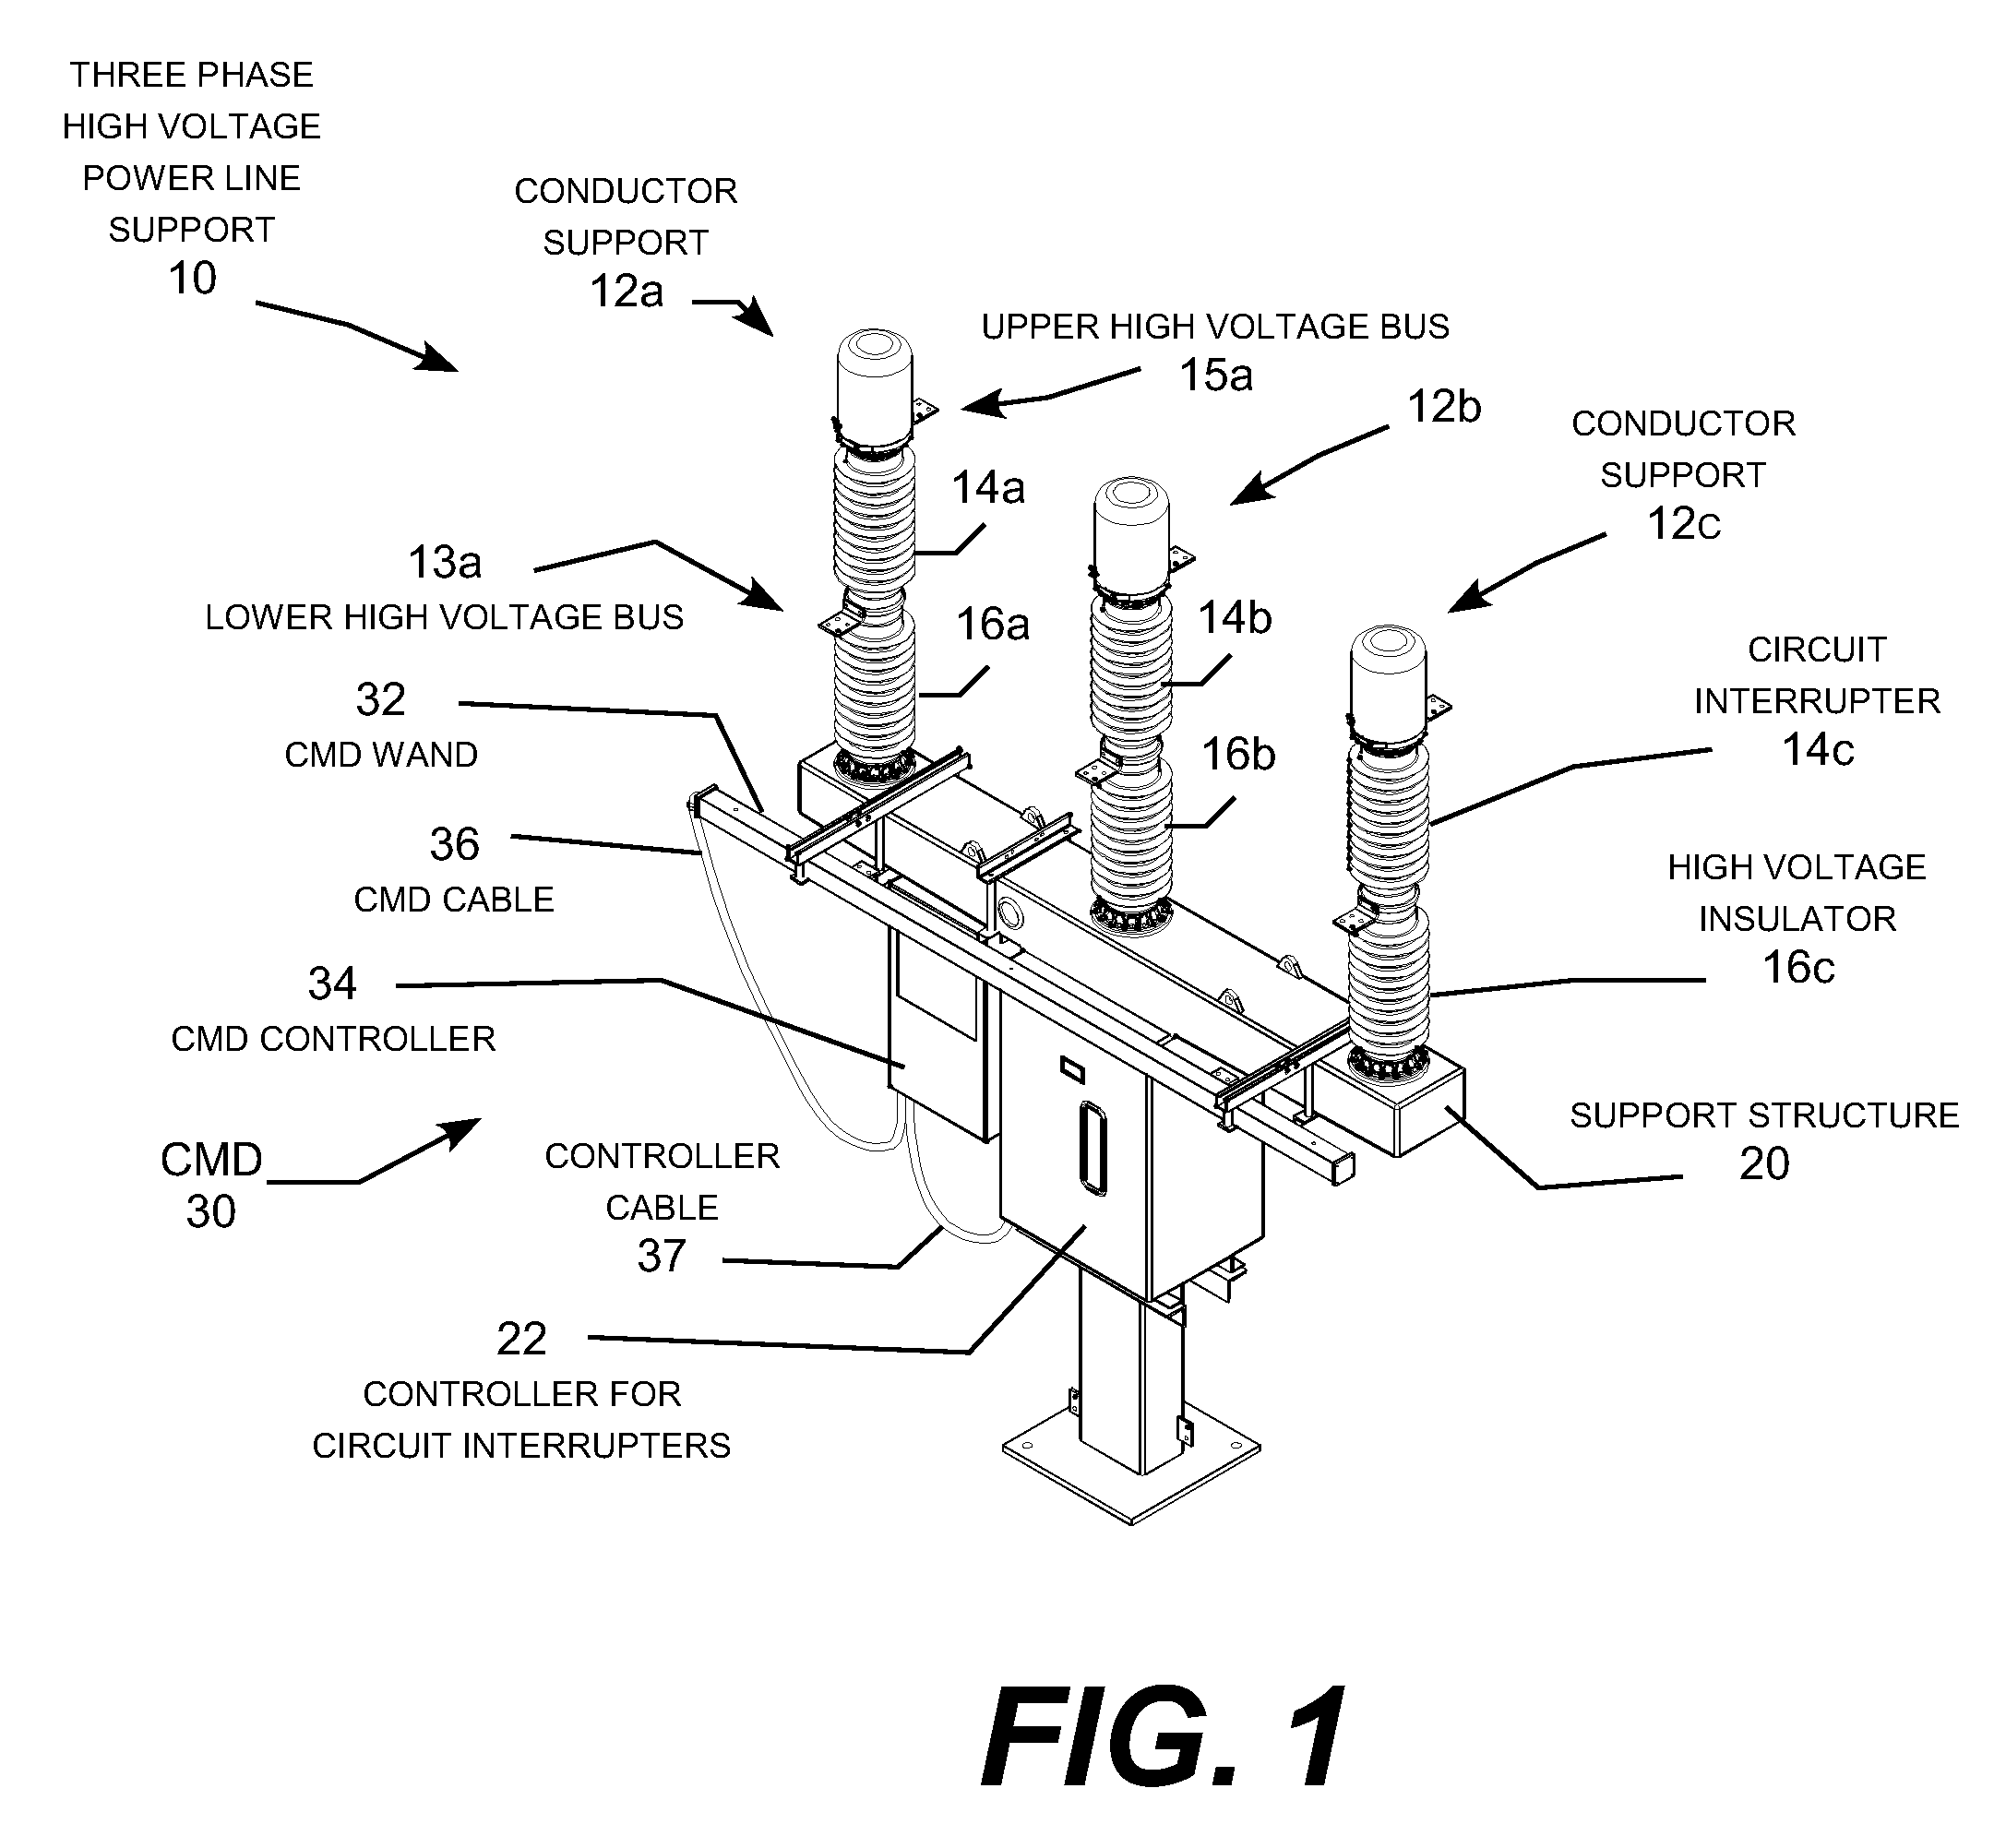 Current monitoring device for high voltage electric power lines